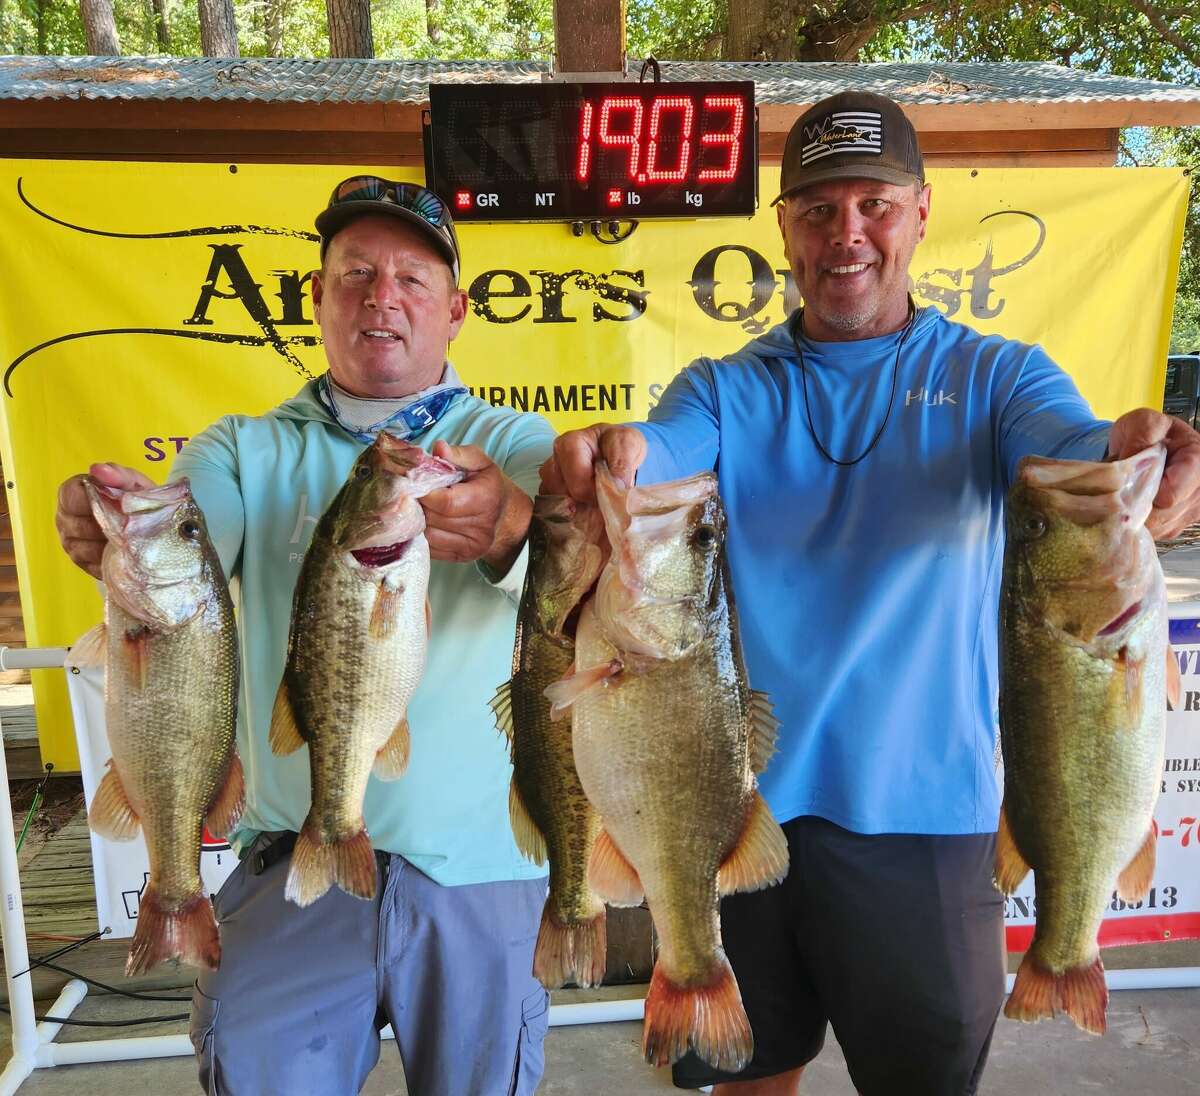 John Stephenson and Ronnie Wagner came in second in the Anglers Quest Team Championship with a total weight up 35.16 pounds.